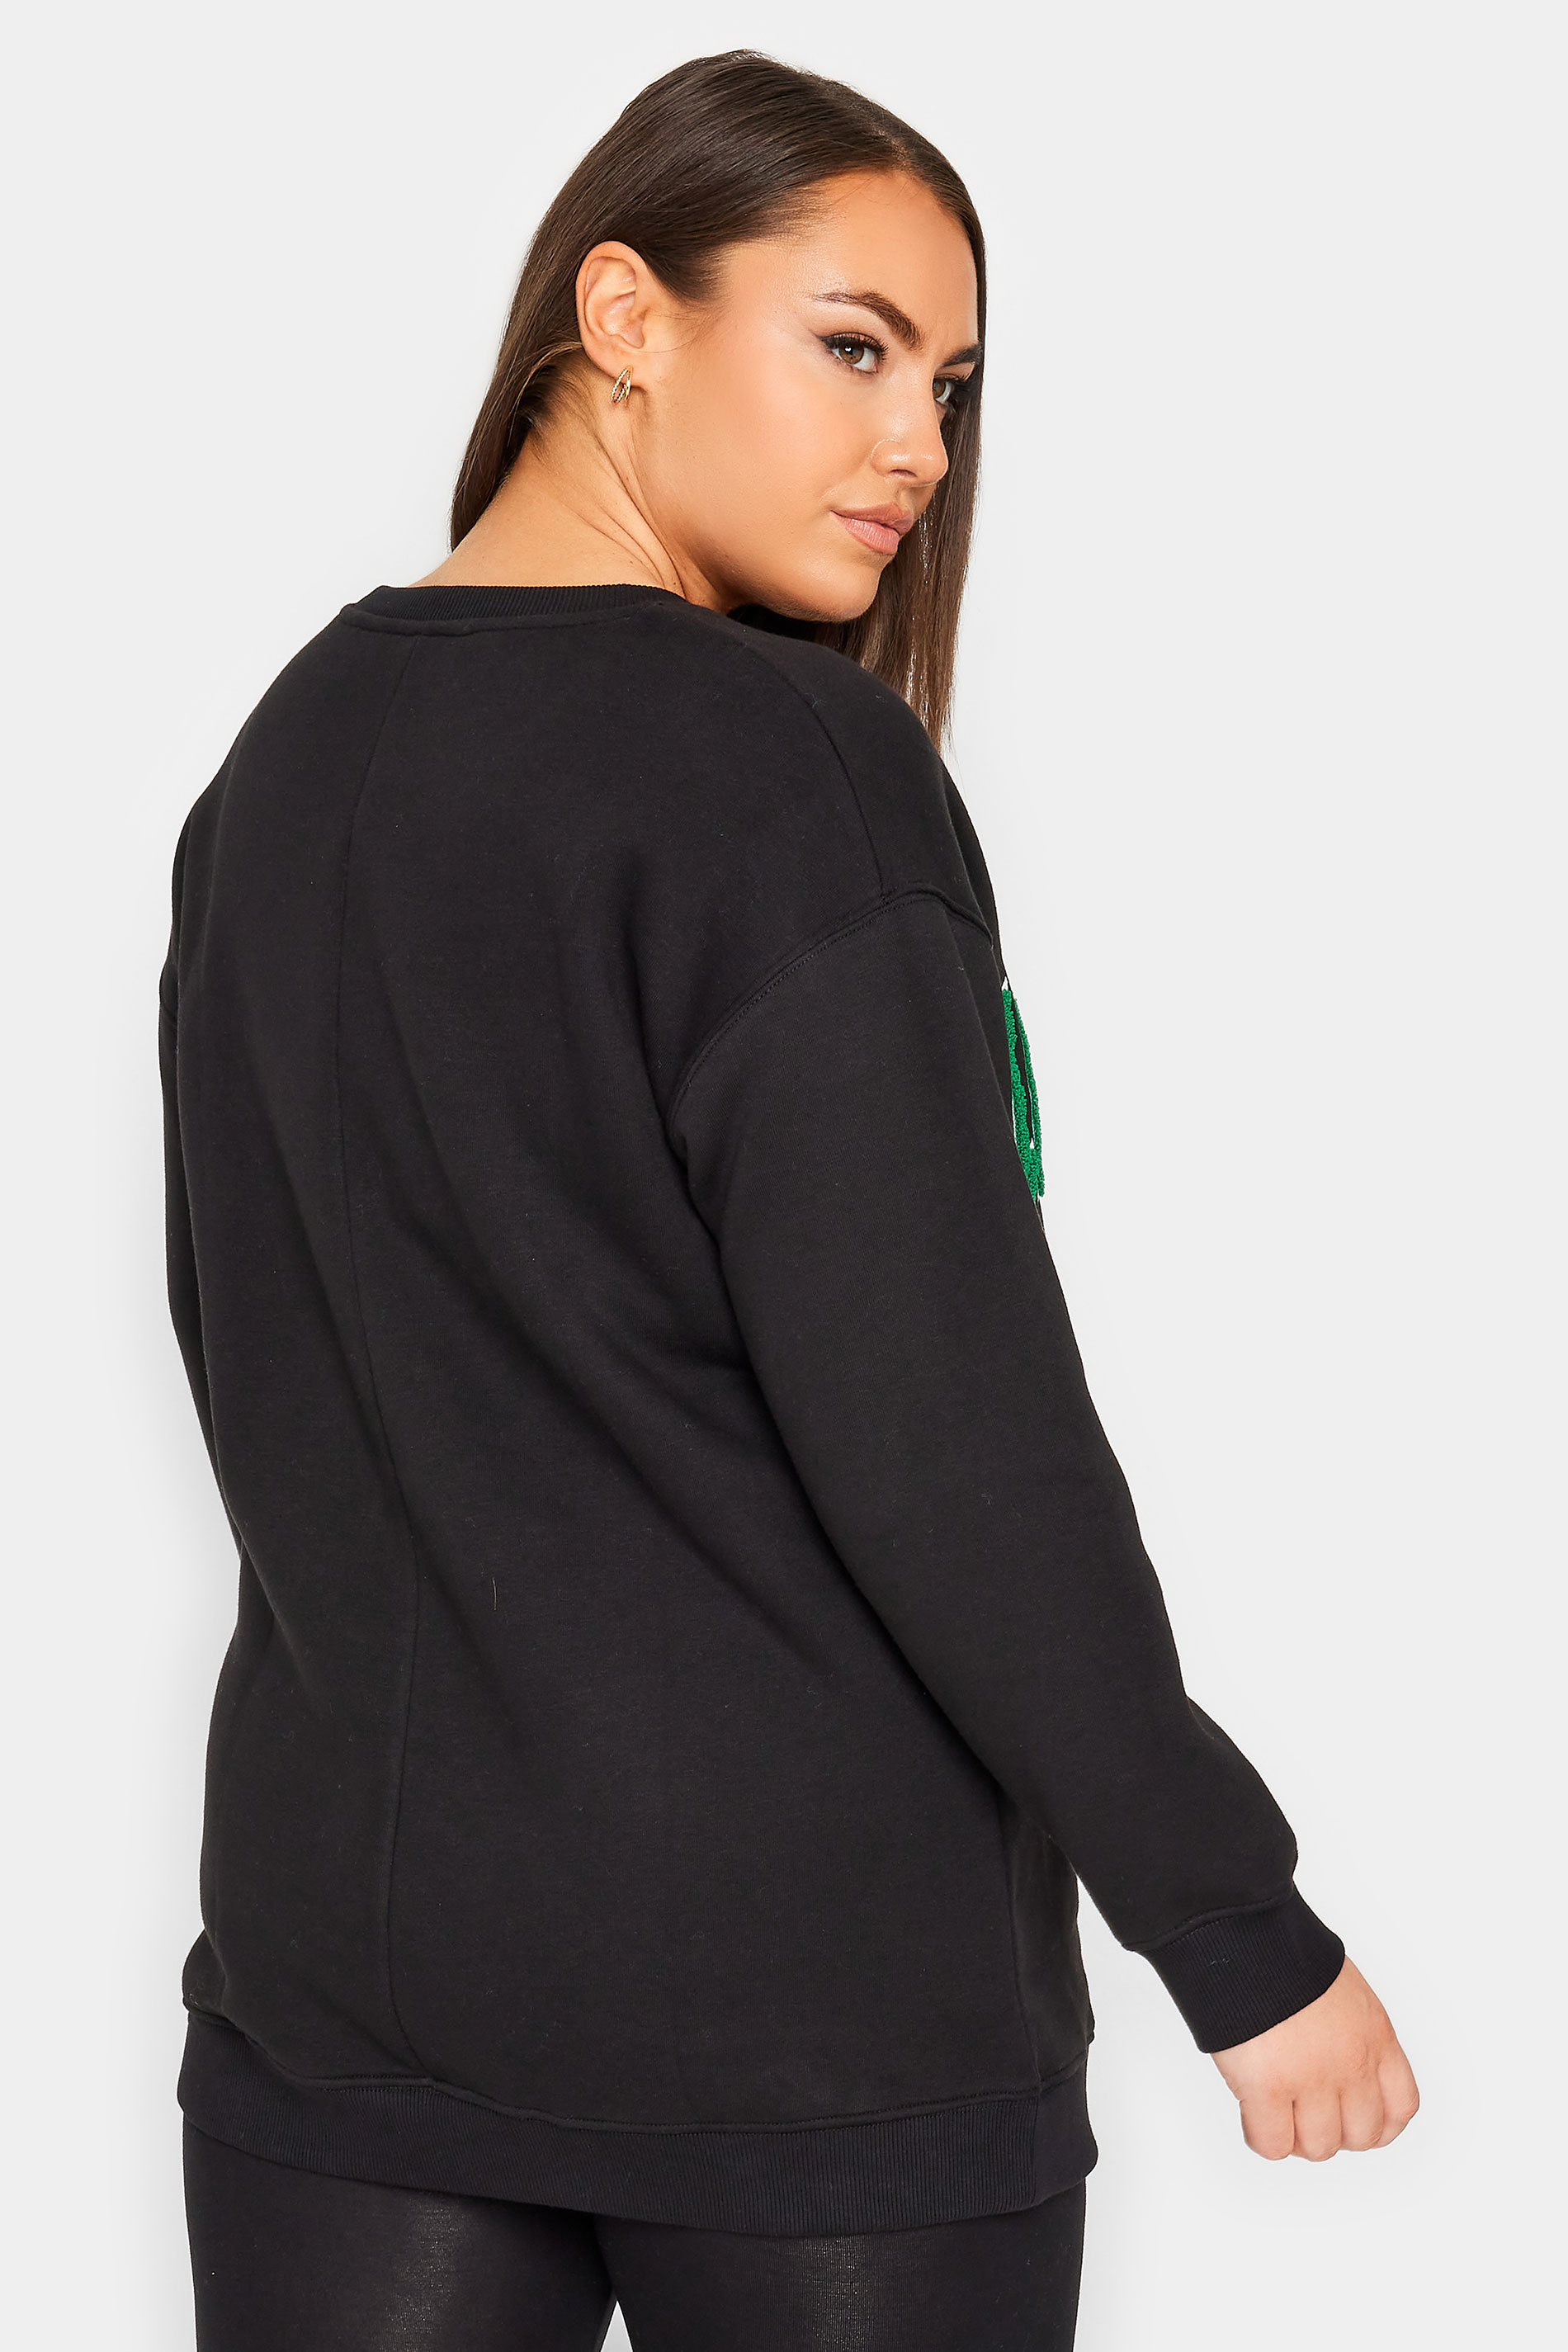 YOURS Plus Size Black 'Los Angeles' Embroidered Slogan Sweatshirt | Yours Clothing 2